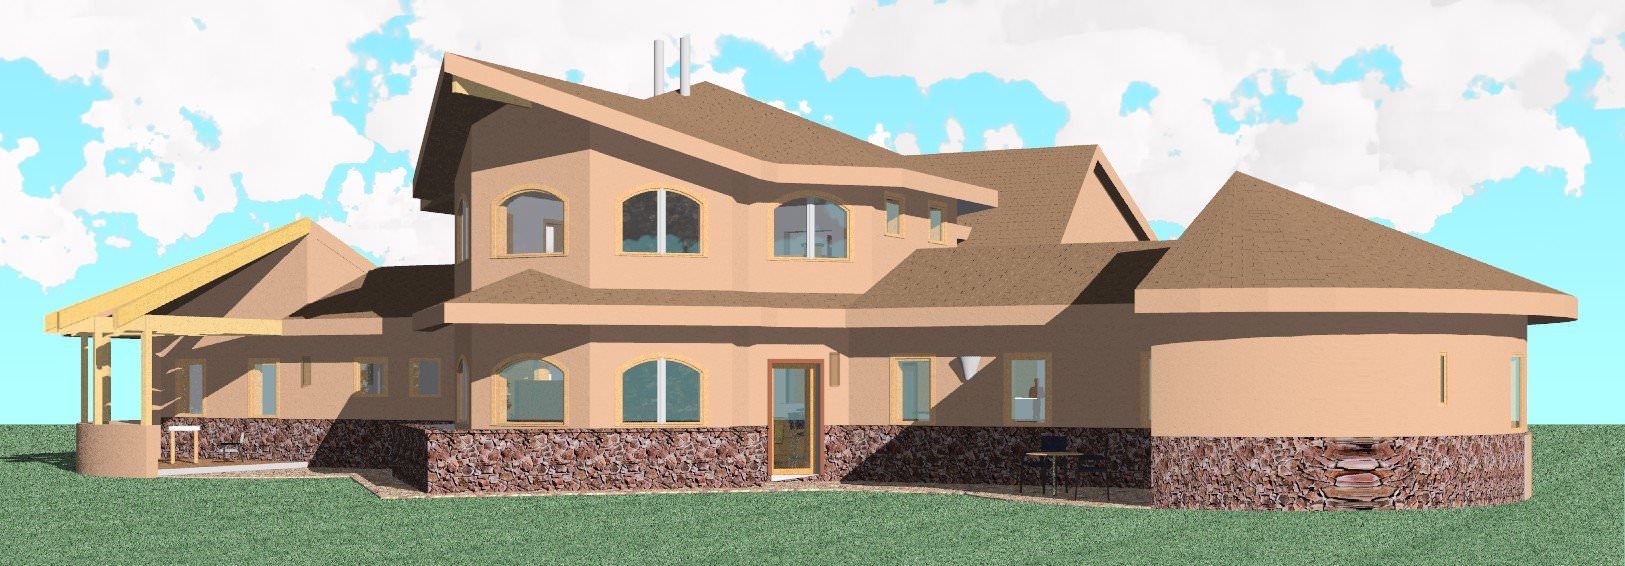 CAD Model of Custom Sustainable Home in Colorado